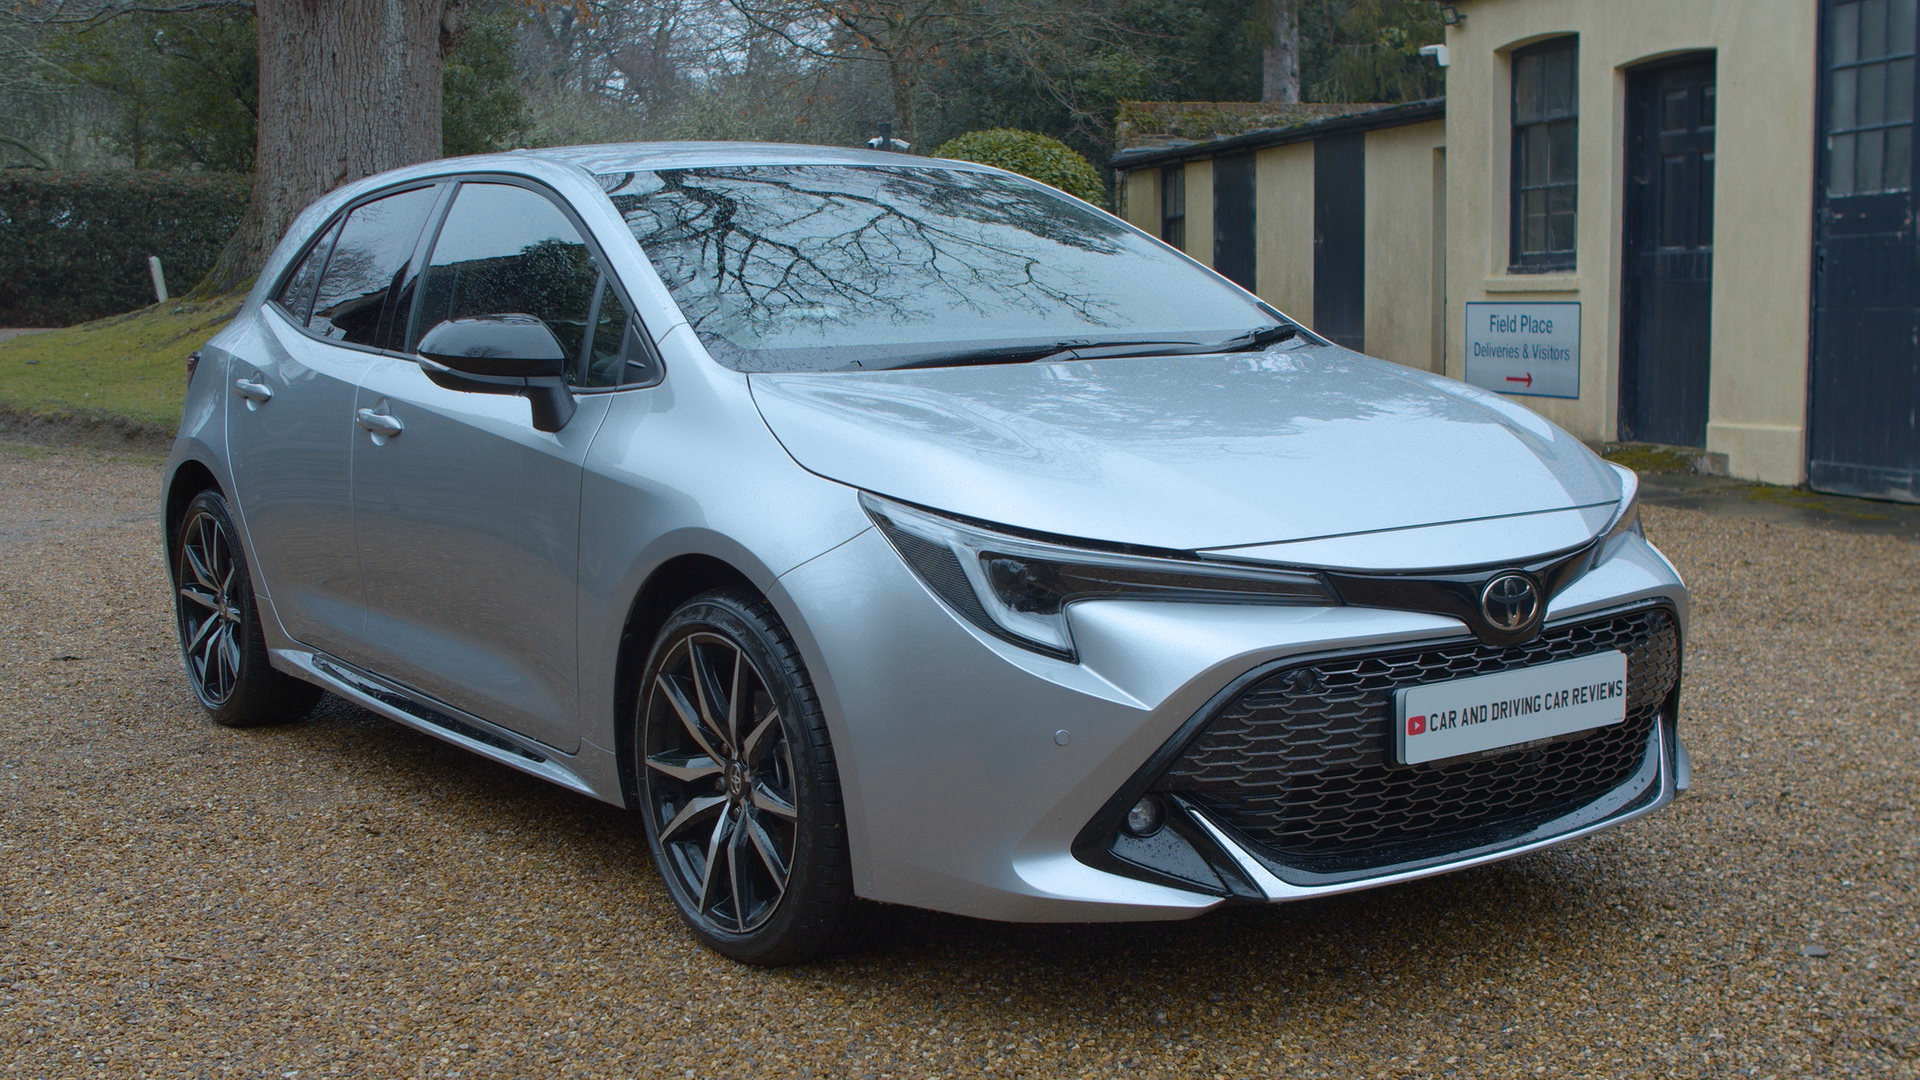 TOYOTA COROLLA HATCHBACK 1.8 Hybrid Excel 5dr CVT [Panoramic Roof]